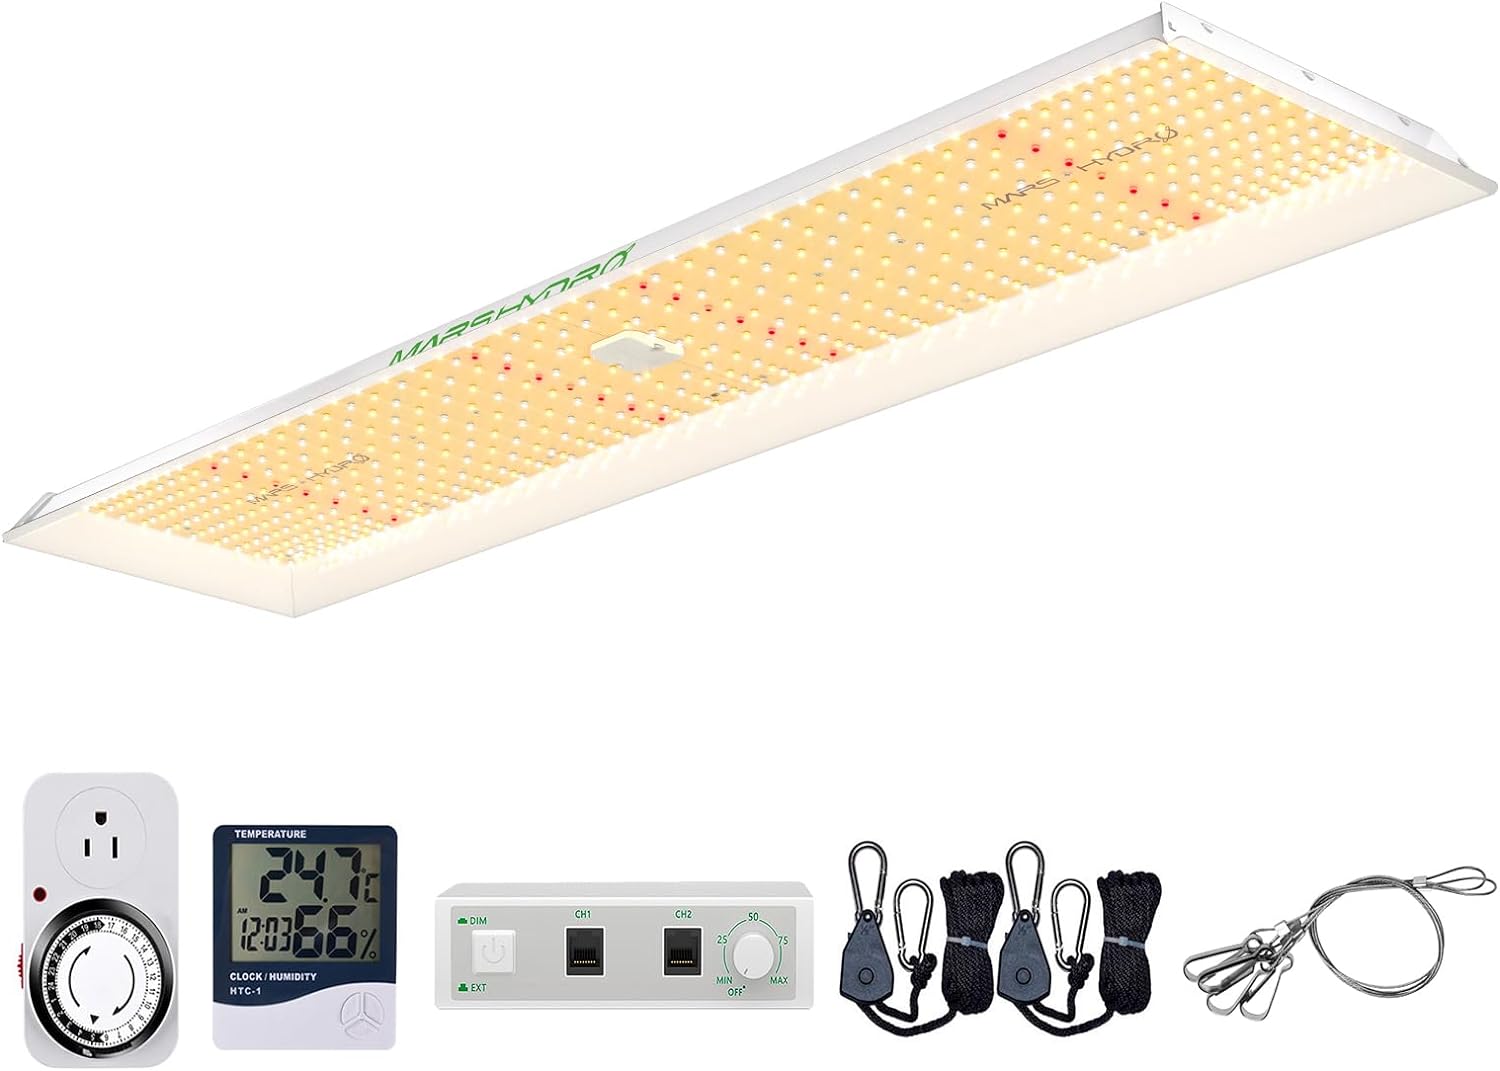 I have had this light for about two weeks now. The light appears well made and comes with the normal hardware for hanging plus a timer and temp/humidity sensor. I would have preferred those to be an option since I have them already and suspect most growers do as well. For first time growers it' a nice package deal.I have six 3-4 week old plants under it at about 18 and four under a 1500 watt LED and there is a noticeable difference in growth on the plants under the Mars Hydro. I recently purch